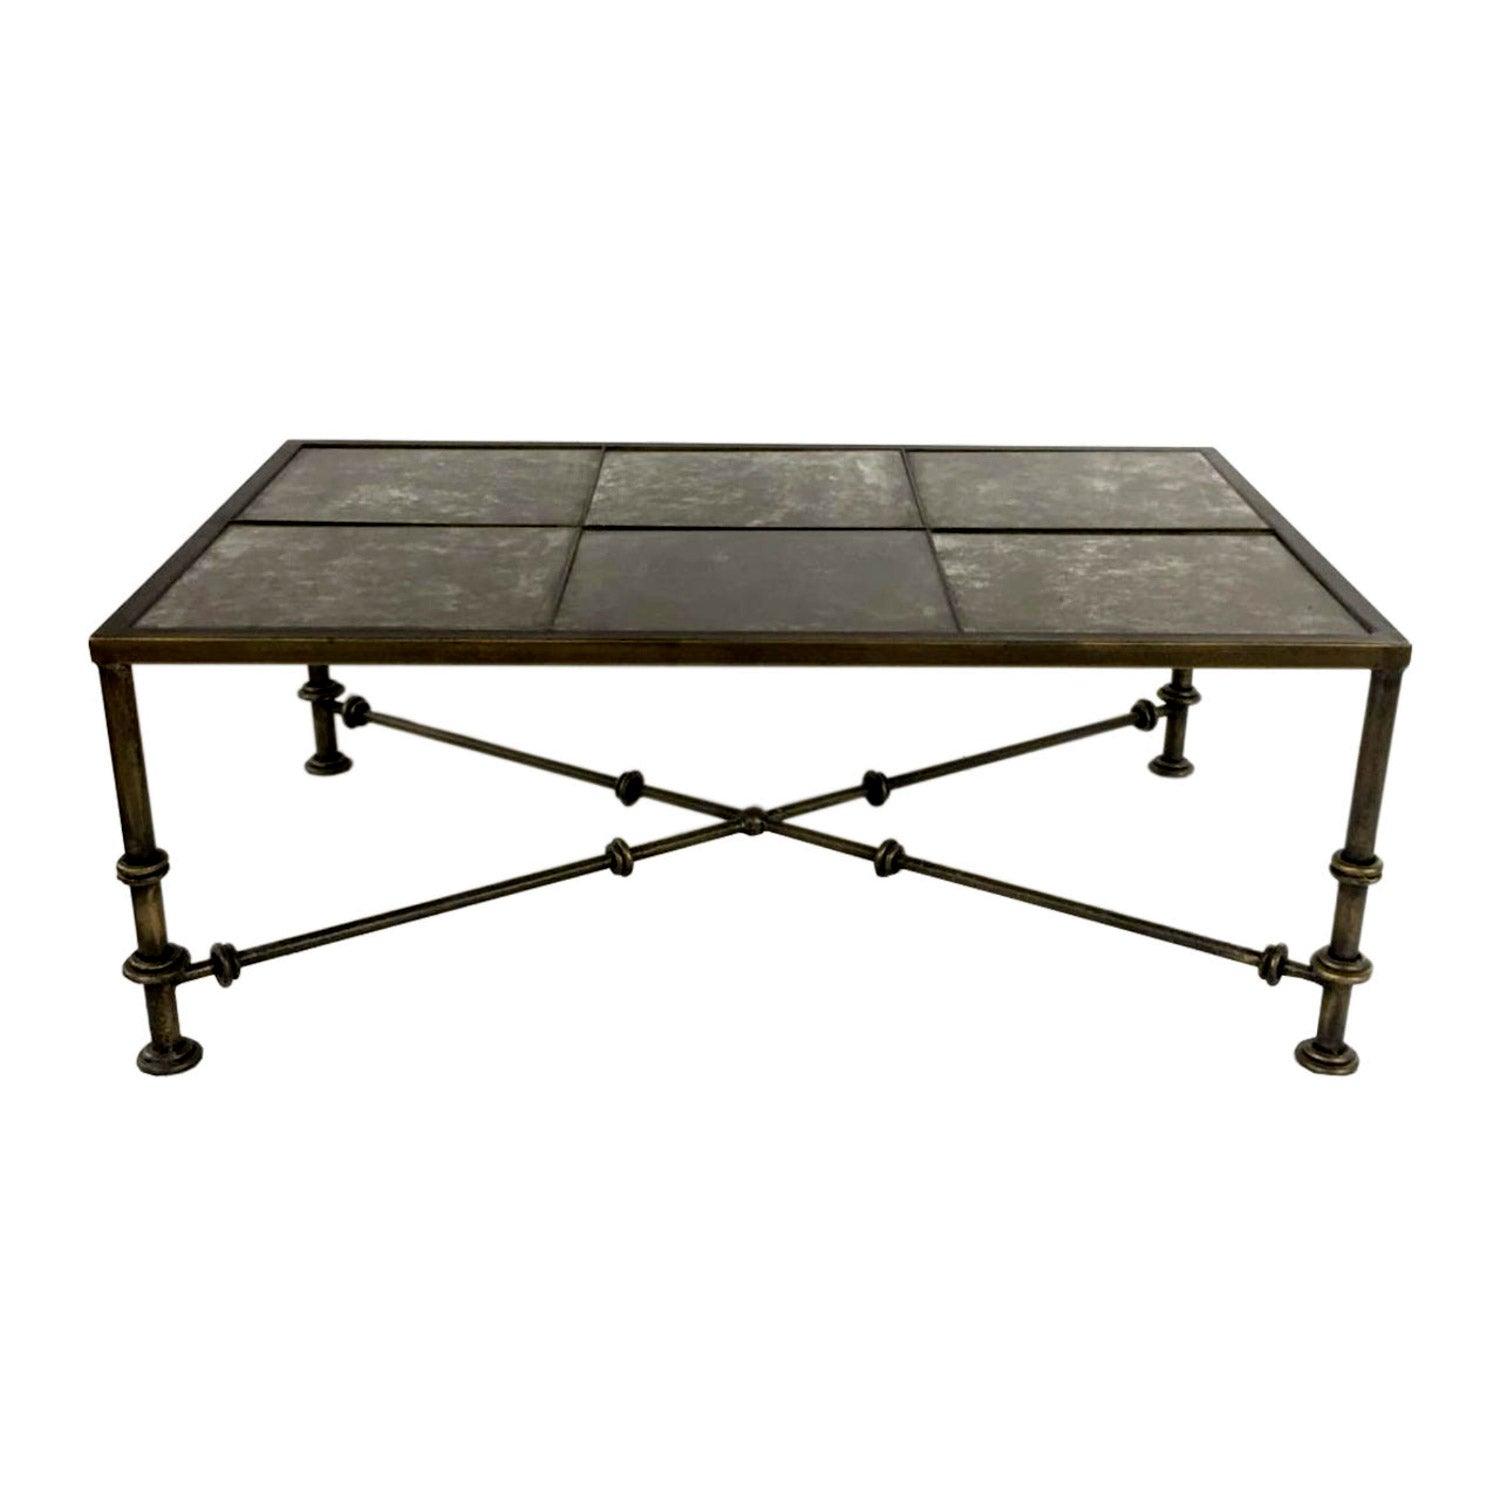 Distressed Iron & Glass Industrial Coffee Table - Belle Escape